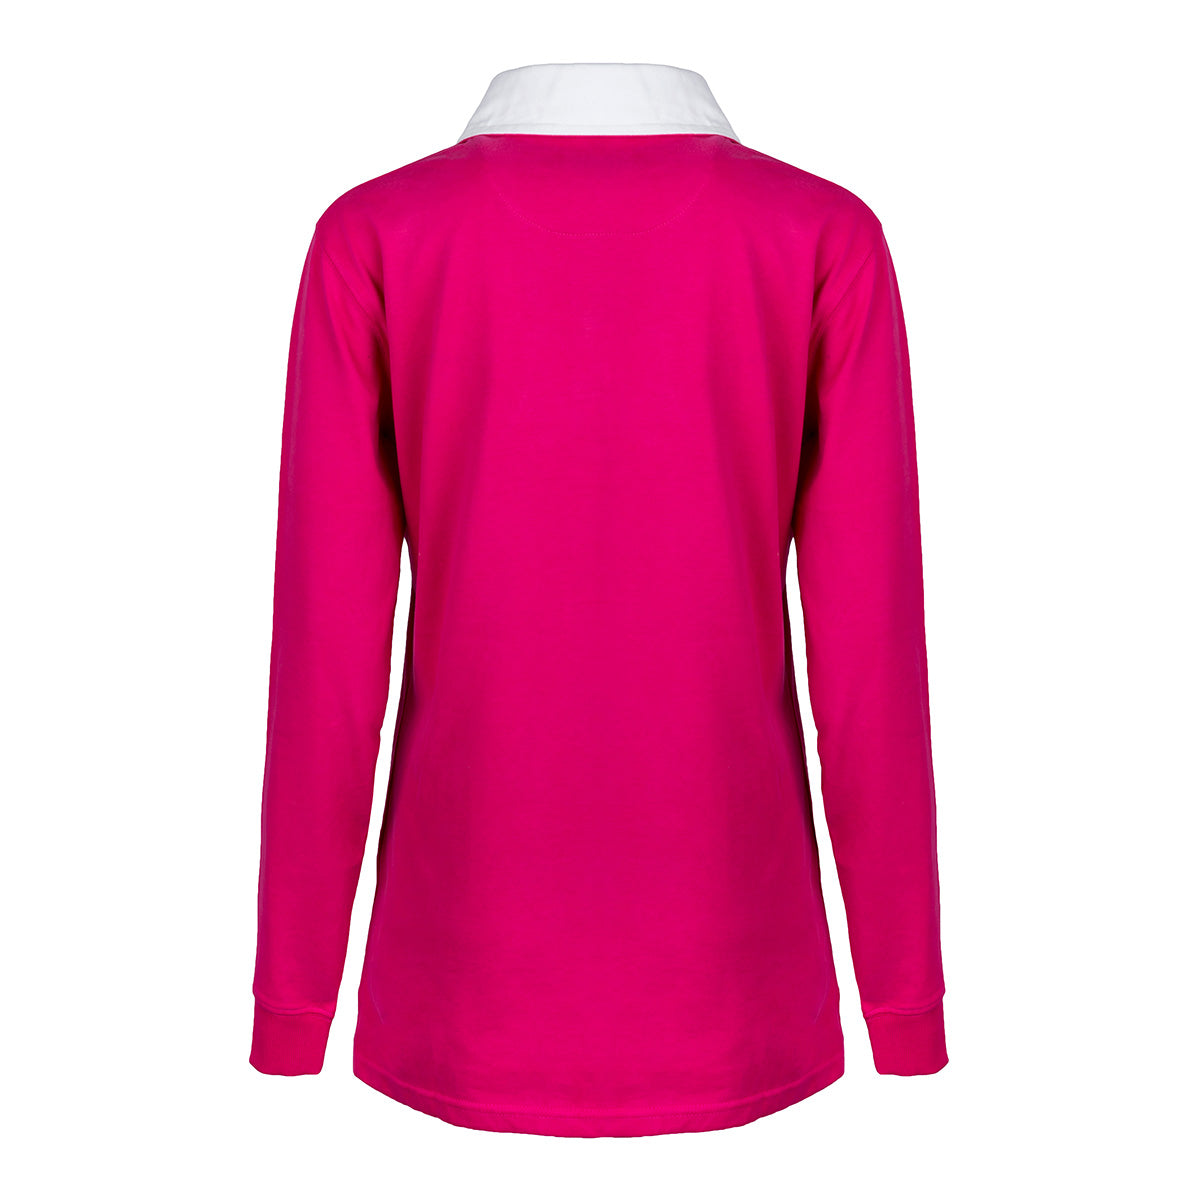 'New Style' Brushed Cotton Ladies Rugby Shirt with SOC Logo - Fuchsia